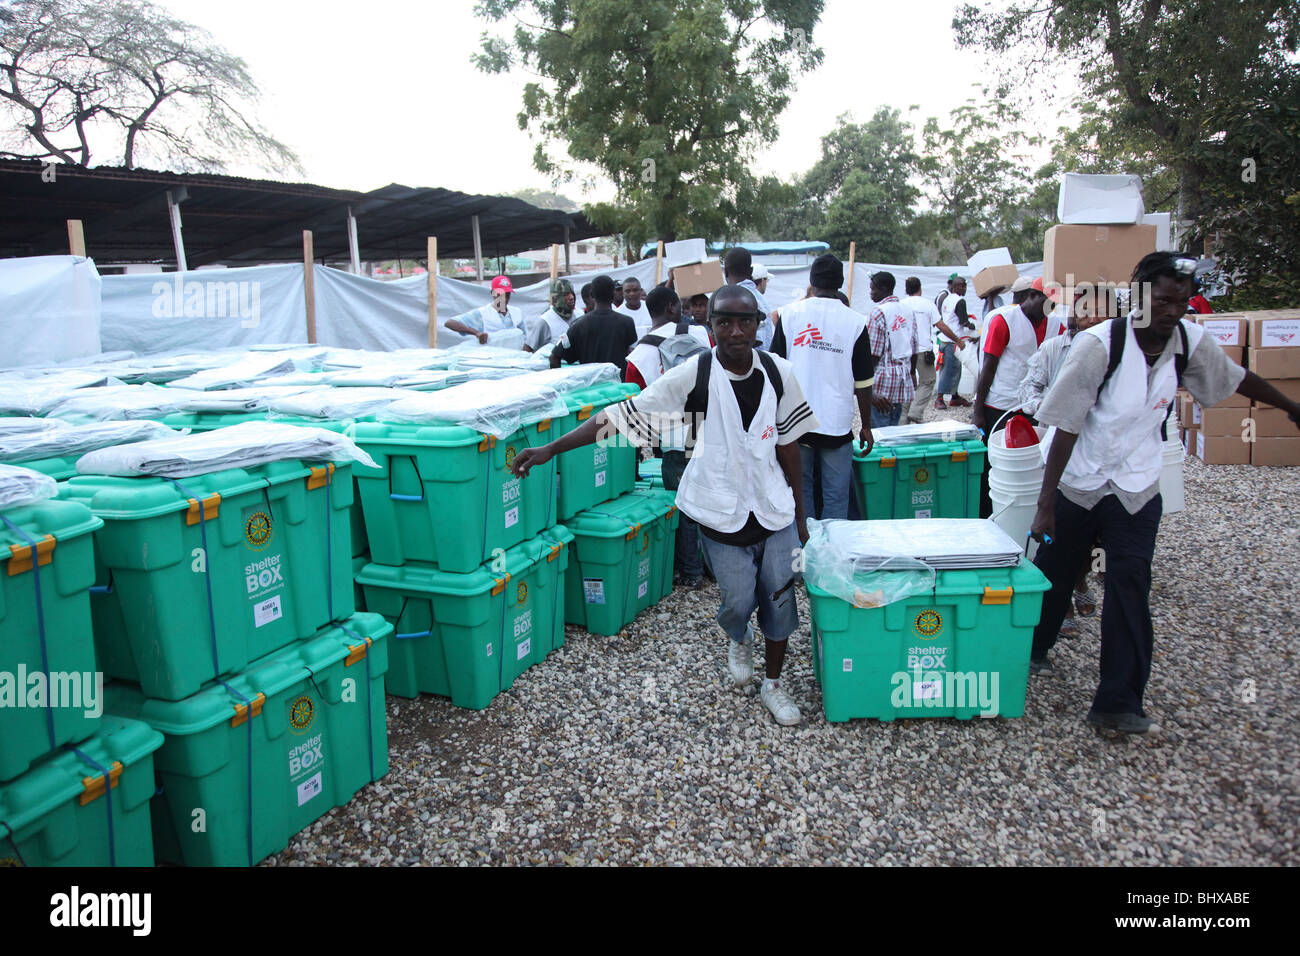 Distribution of aid by Shelterbox and Medecins Sans Frontieres in Port au Prince, Haiti following the earthquake of Jan 2010 Stock Photo